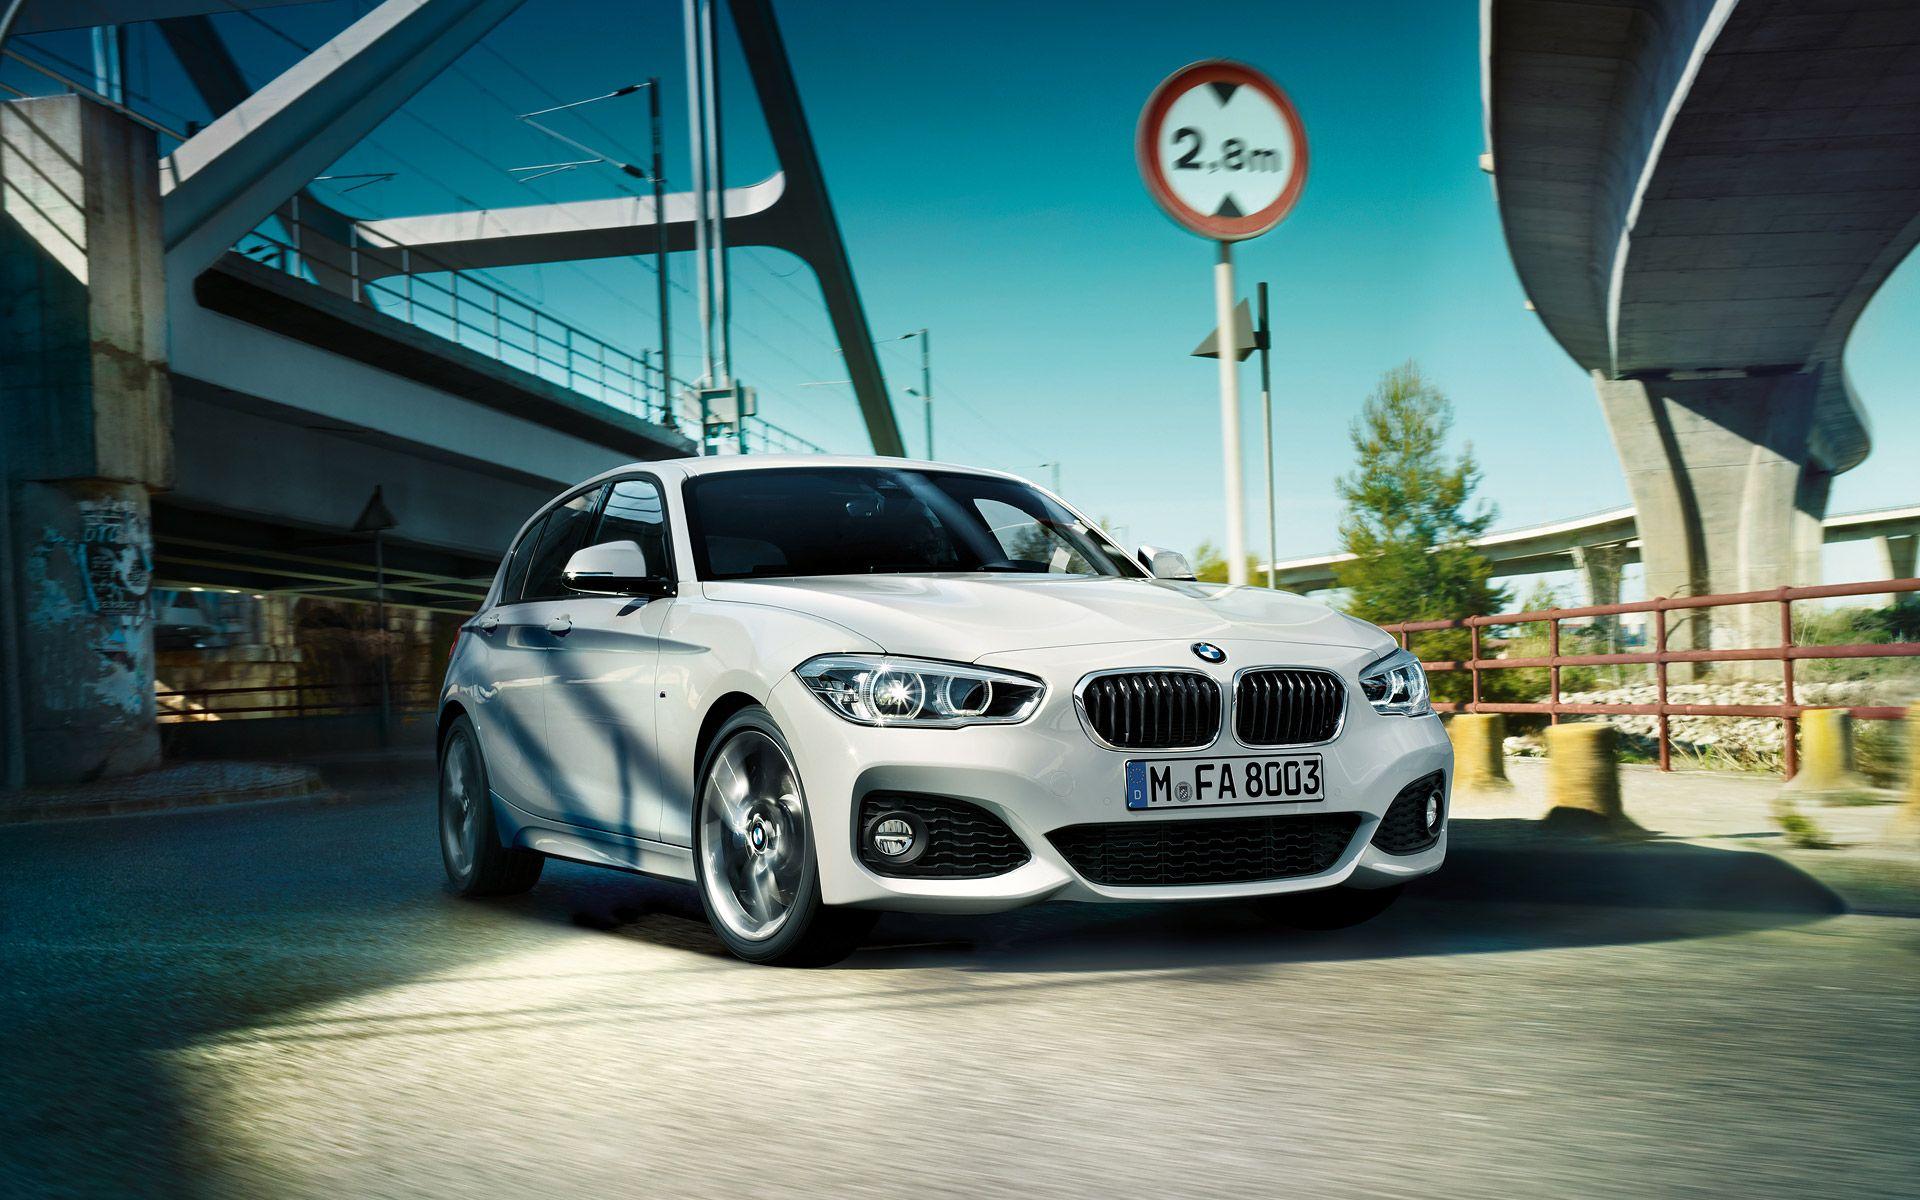 Reasons Why You Should Order The New BMW 1 Series